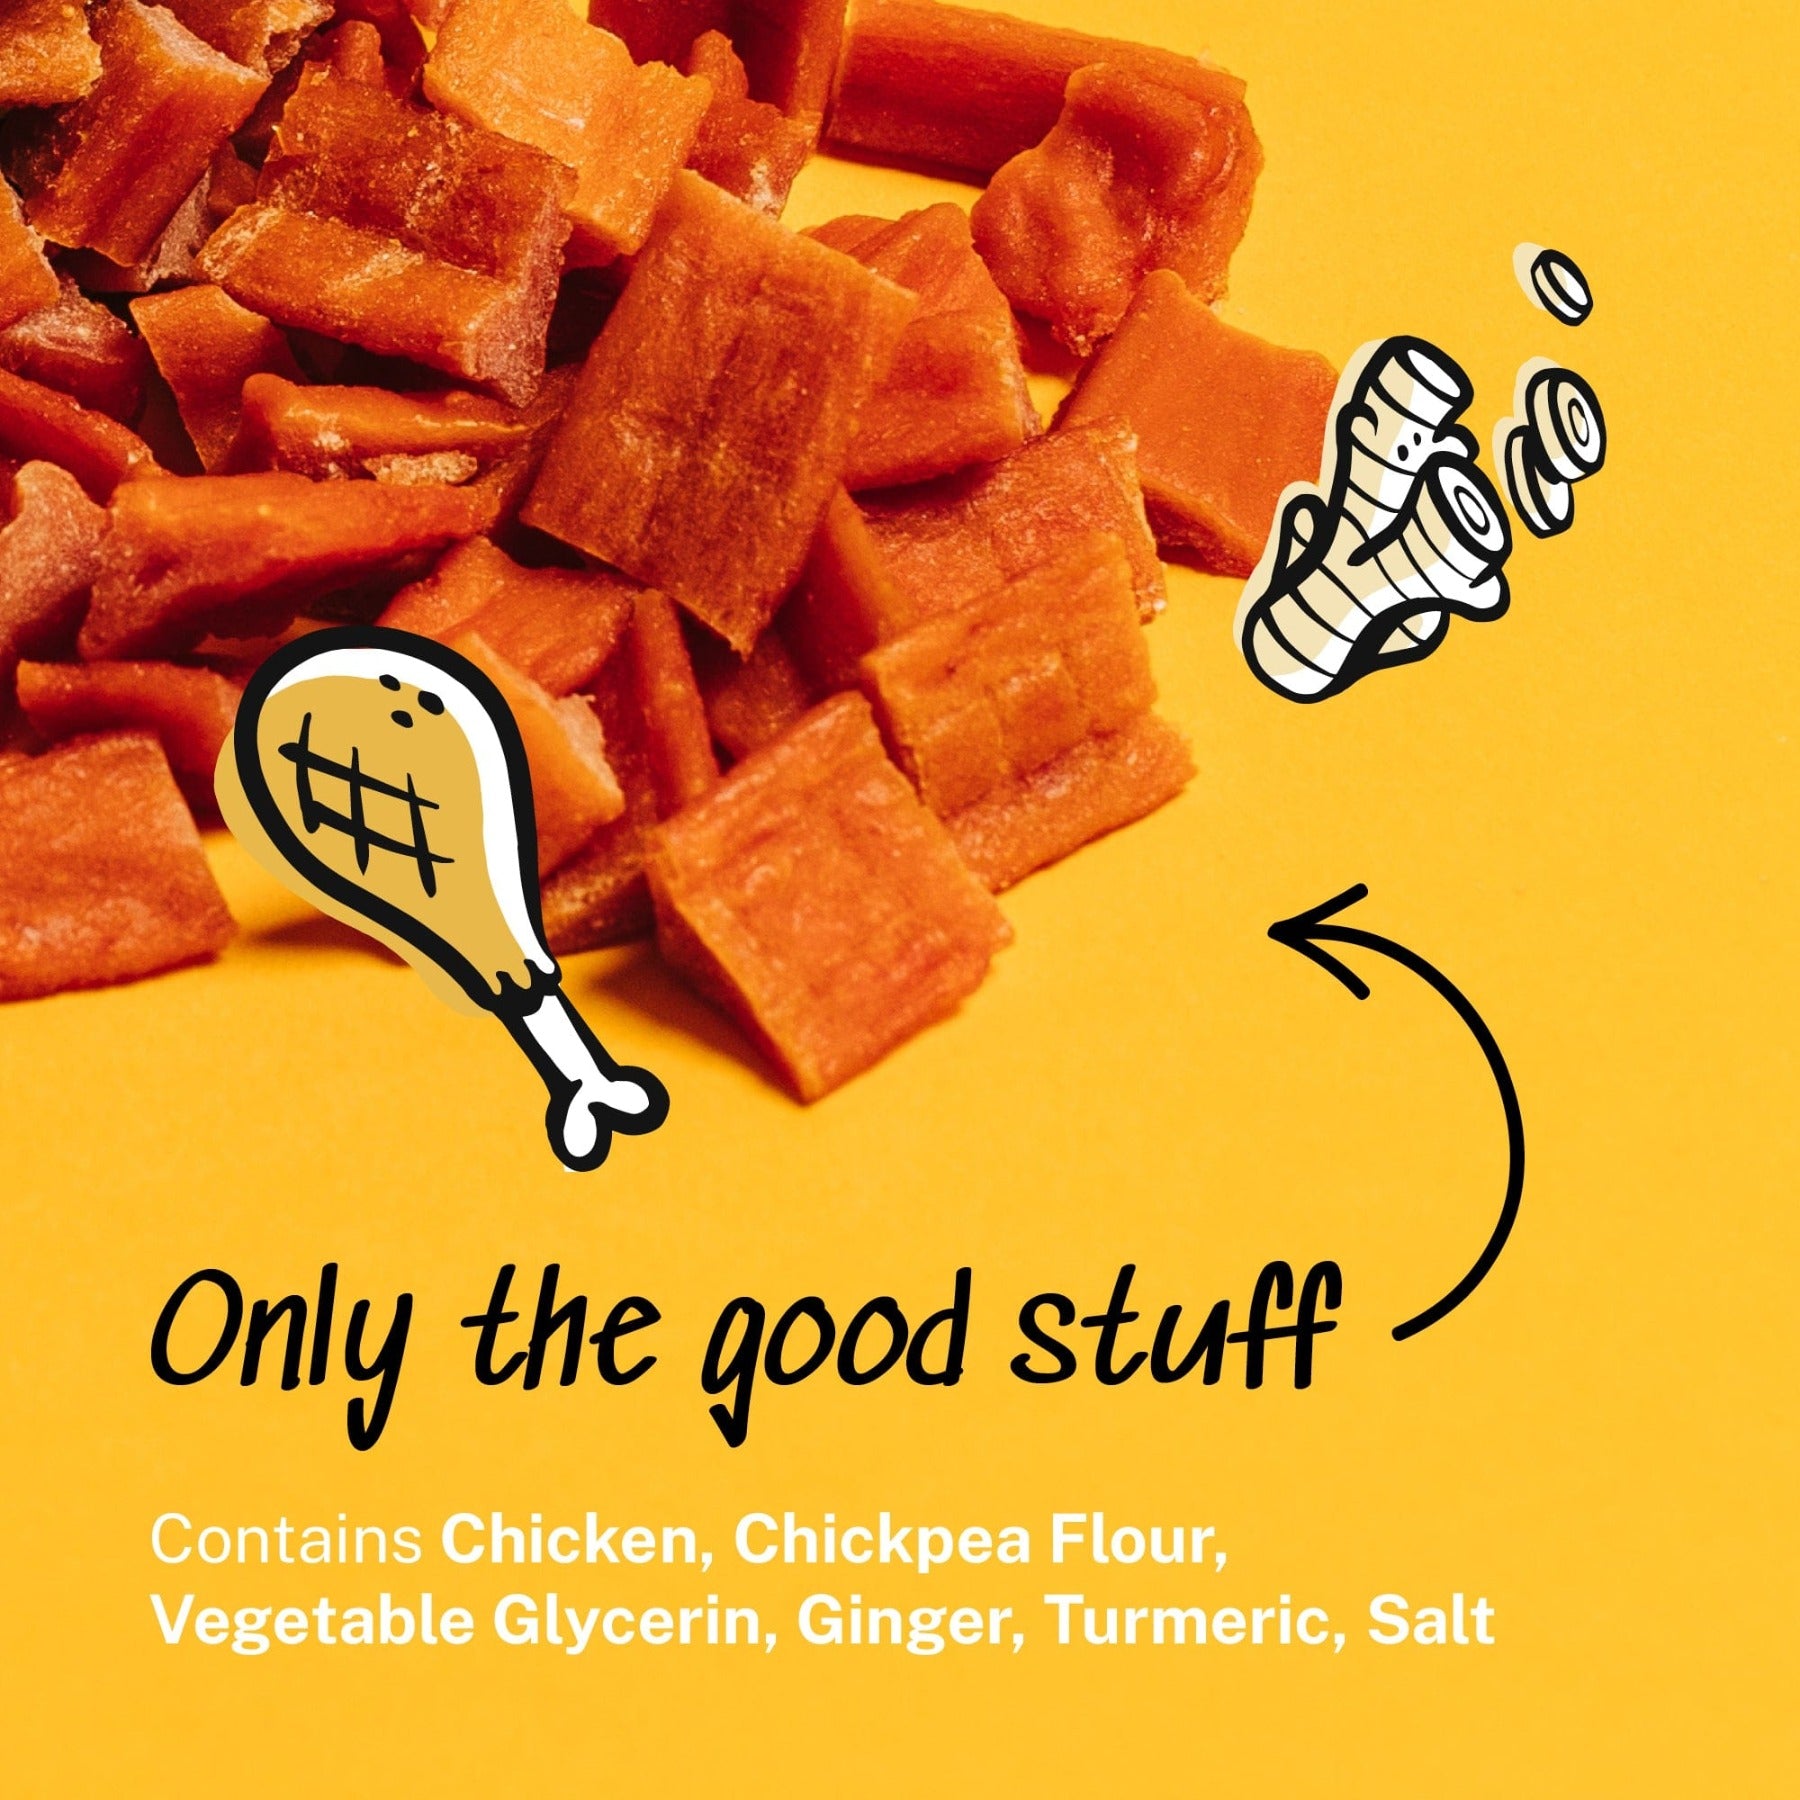 Only the good stuff - Contains chicken, chickpea flour, vegetable glycerin, ginger, turmeric, salt